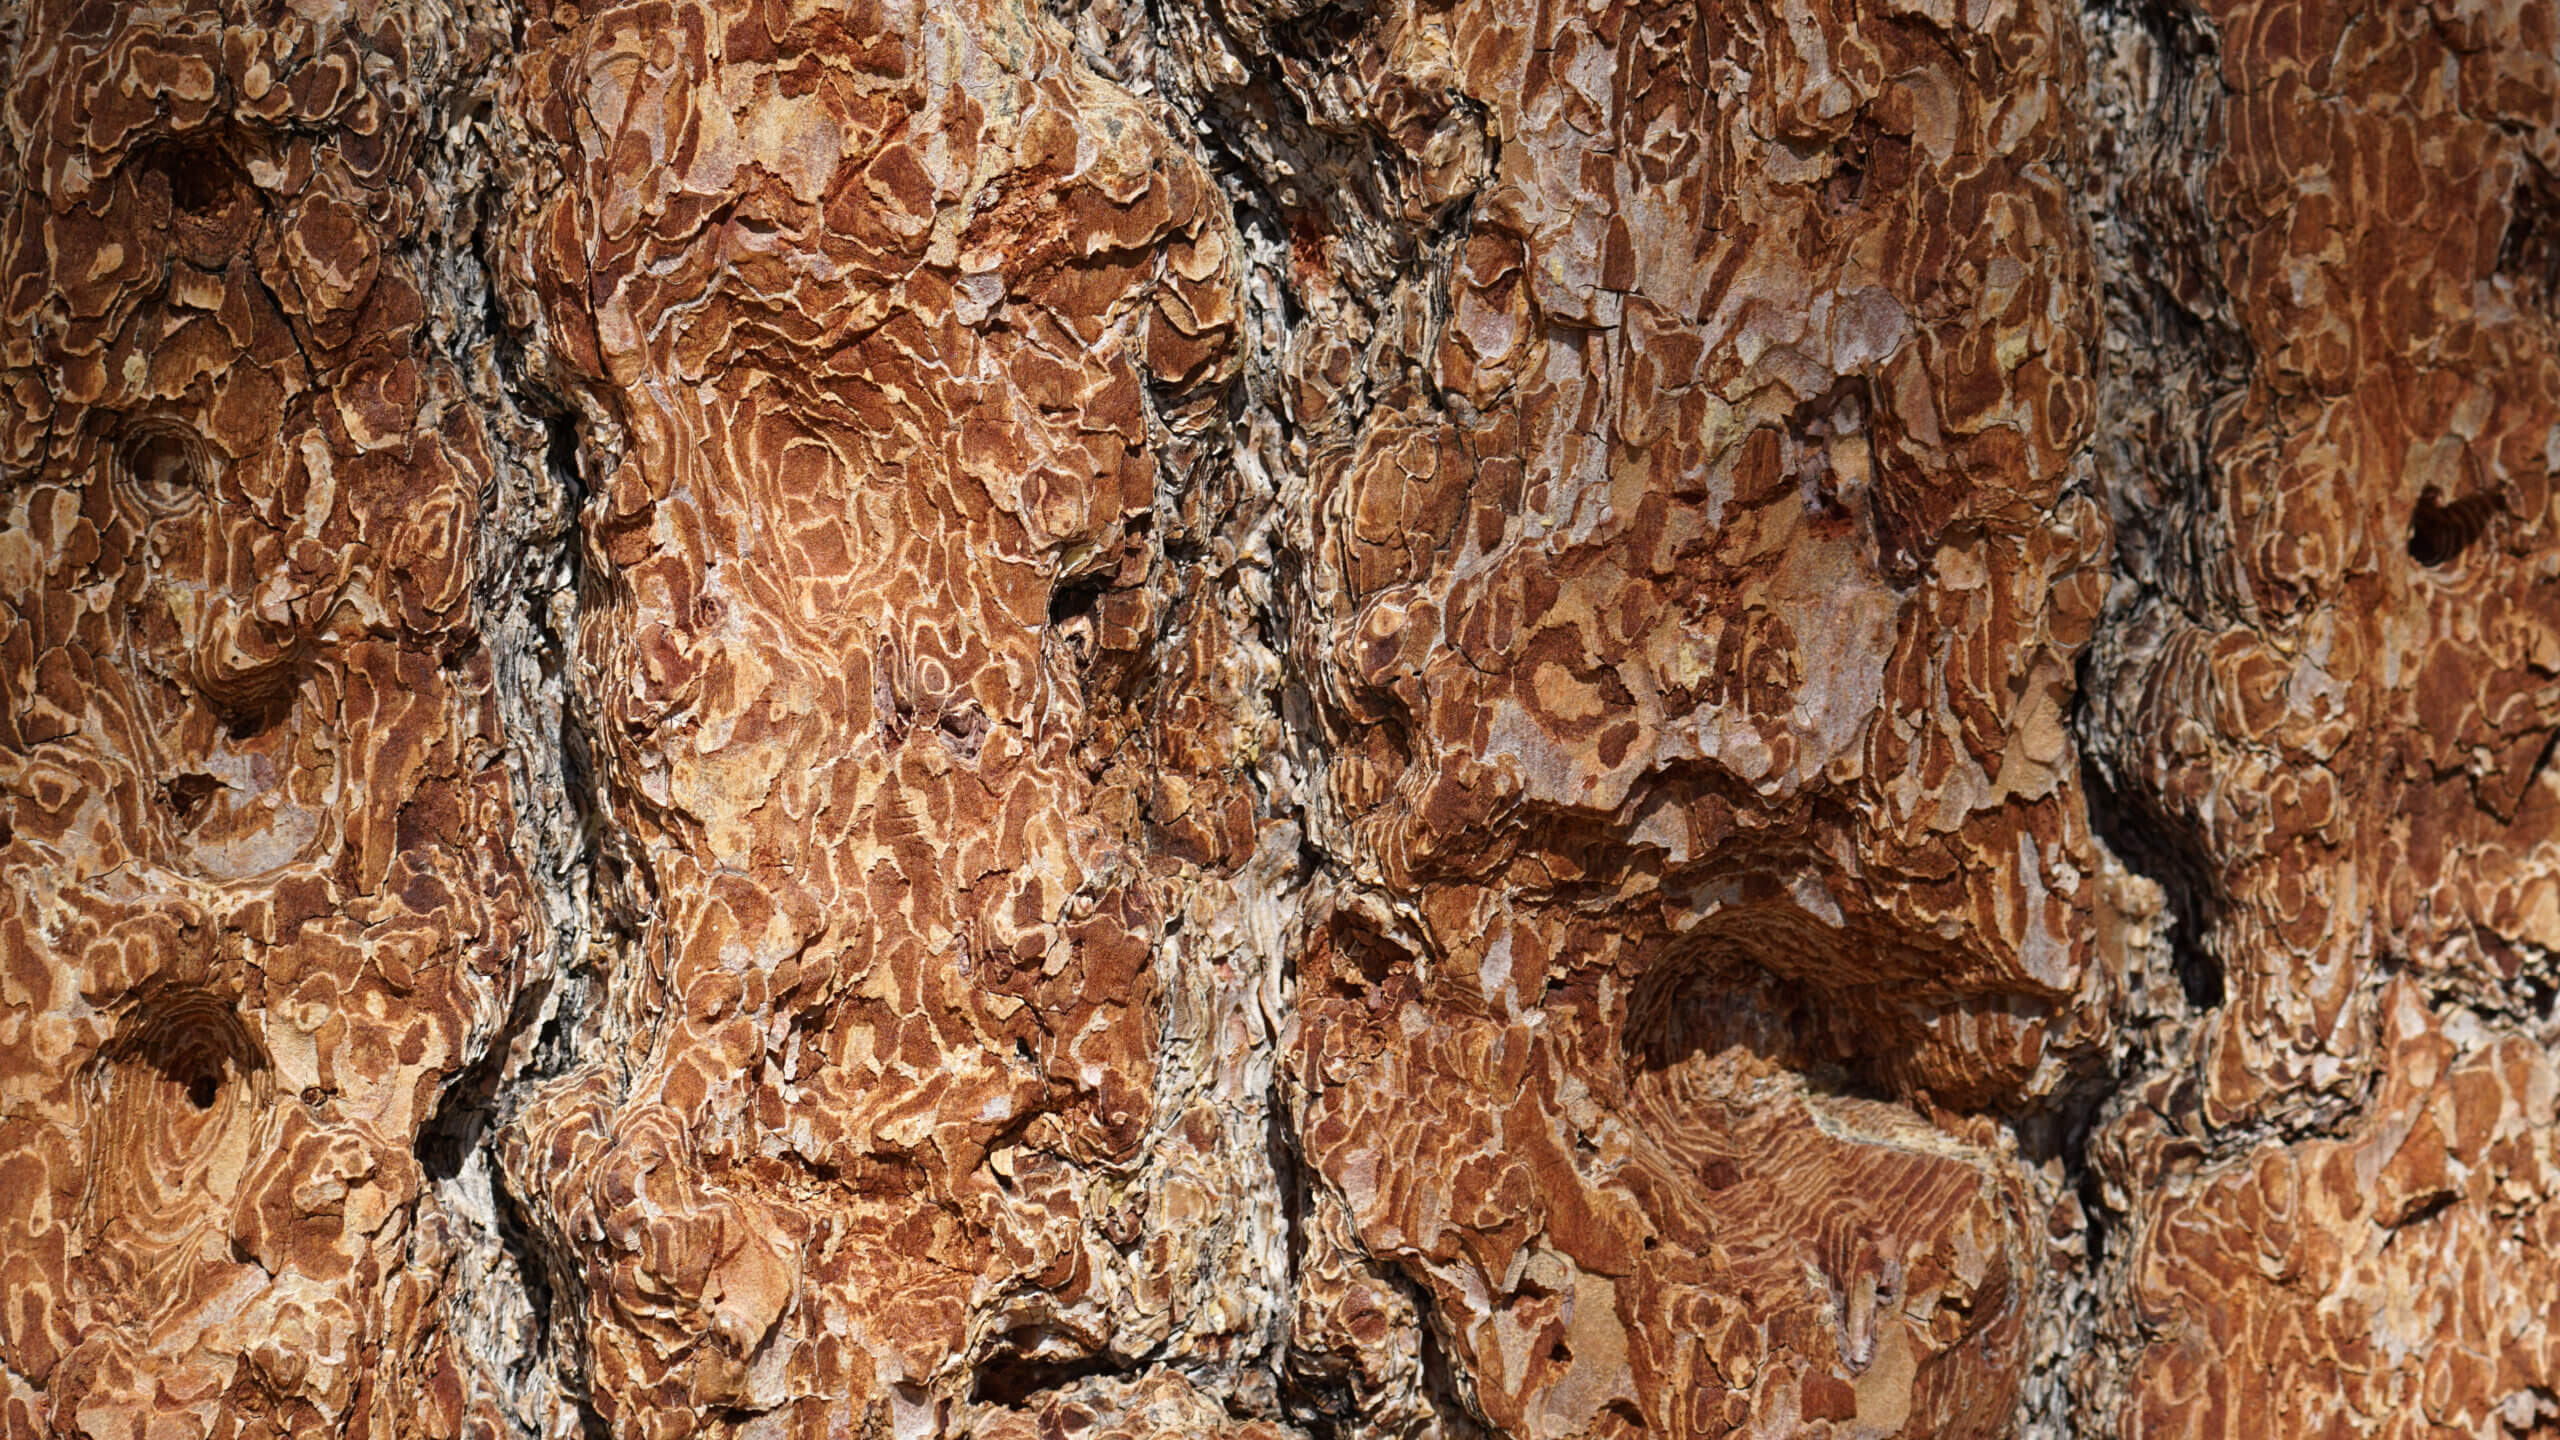 Preventing the decomposition of woody biomass